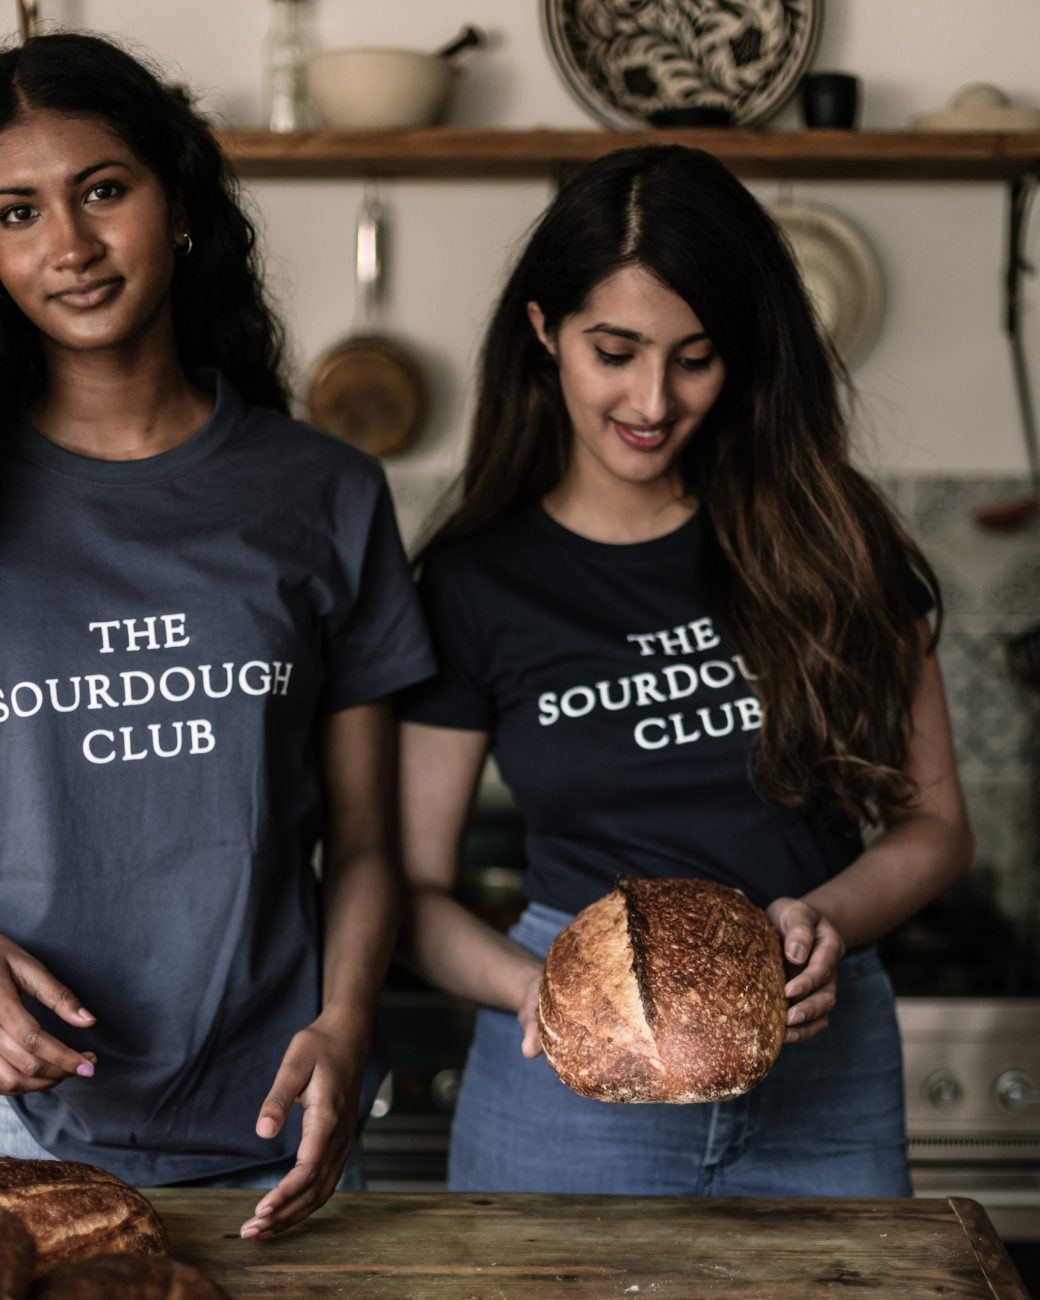 Two students at the sourdough school holding bread